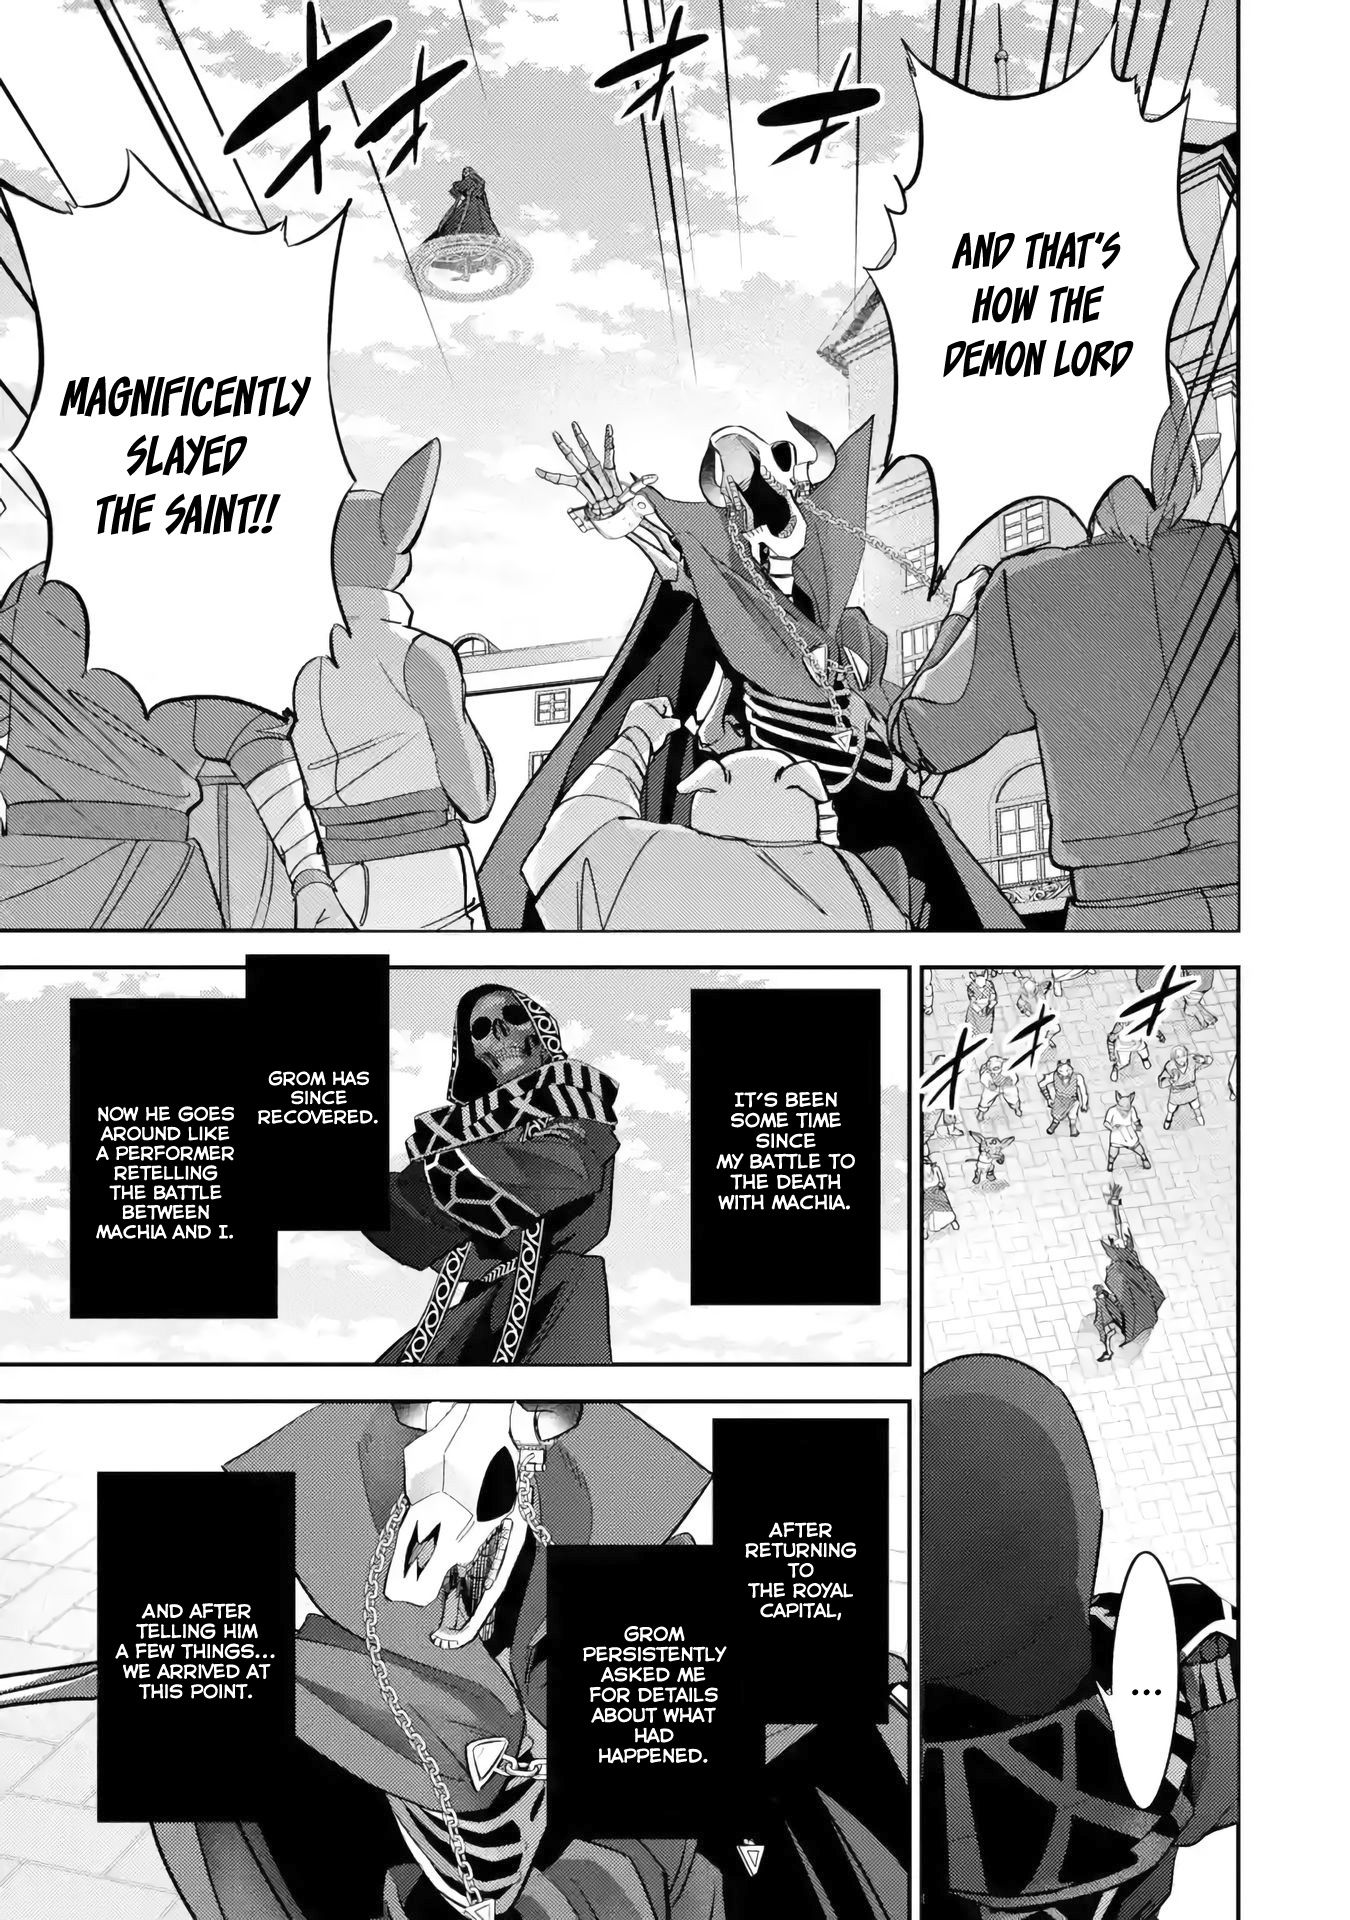 The Executed Sage Who Was Reincarnated As A Lich And Started An All-Out War Vol.8 Chapter 29